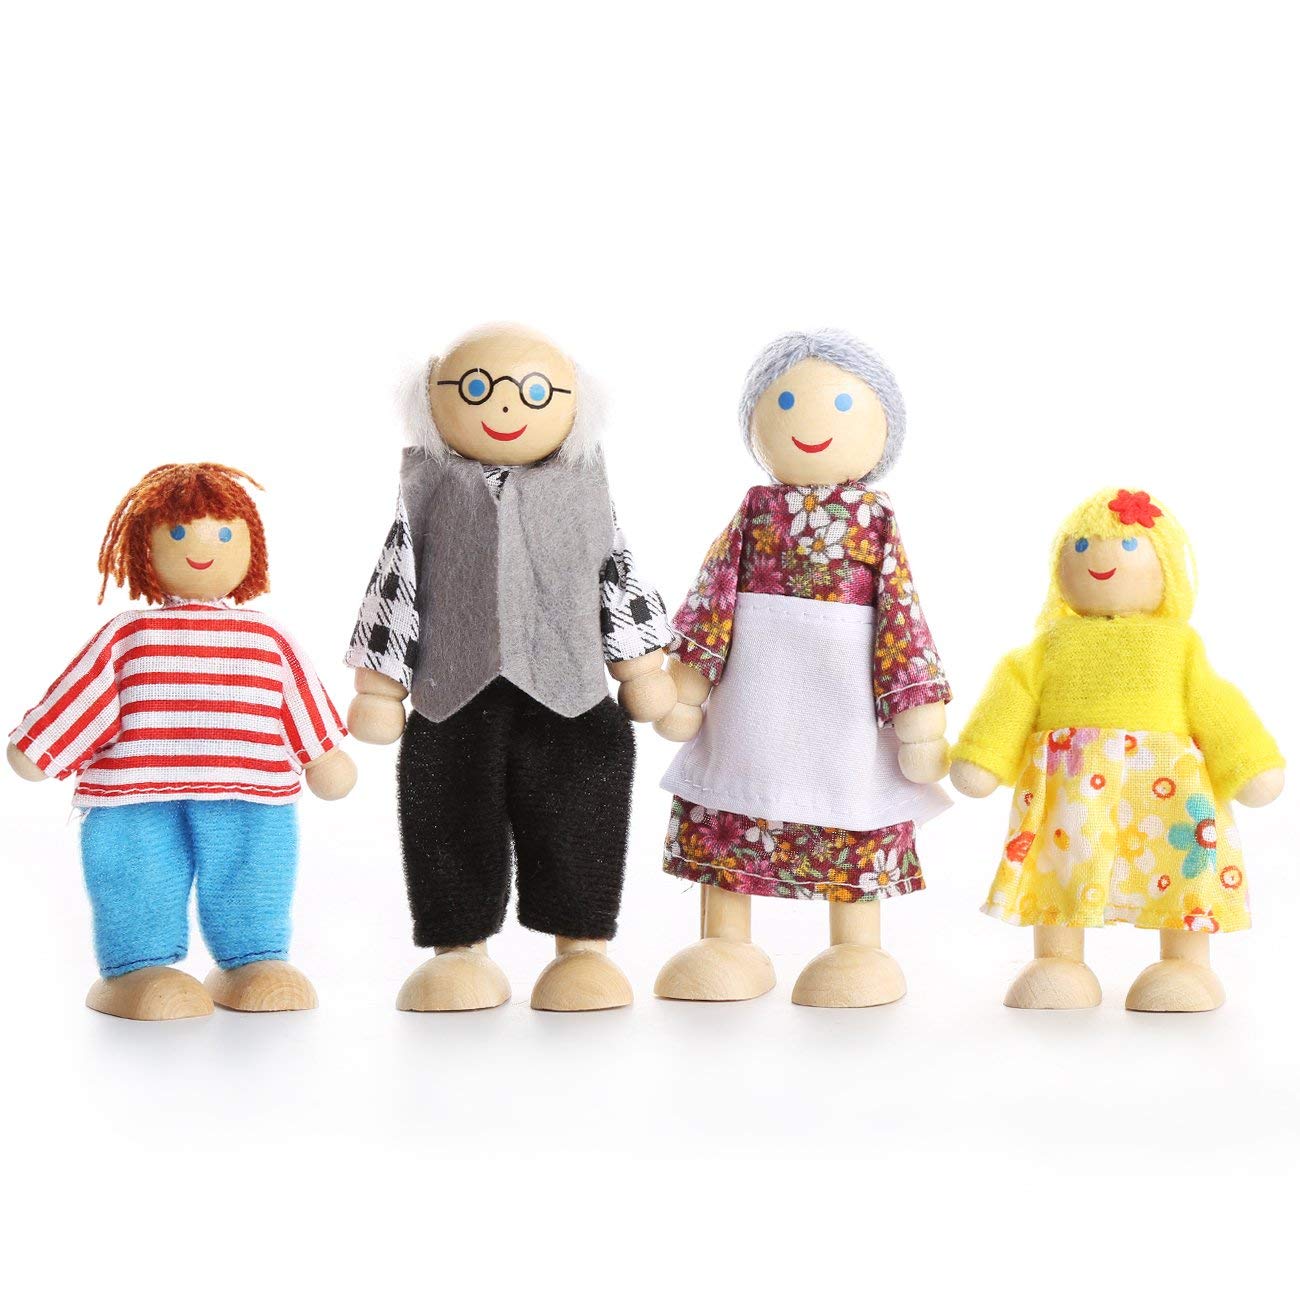 BESTSKY  Kids Girls Lovely Happy Dolls Family Playset Wooden Figures Set of 7 People for Children Dollhouse Pretend Gift - image 3 of 7